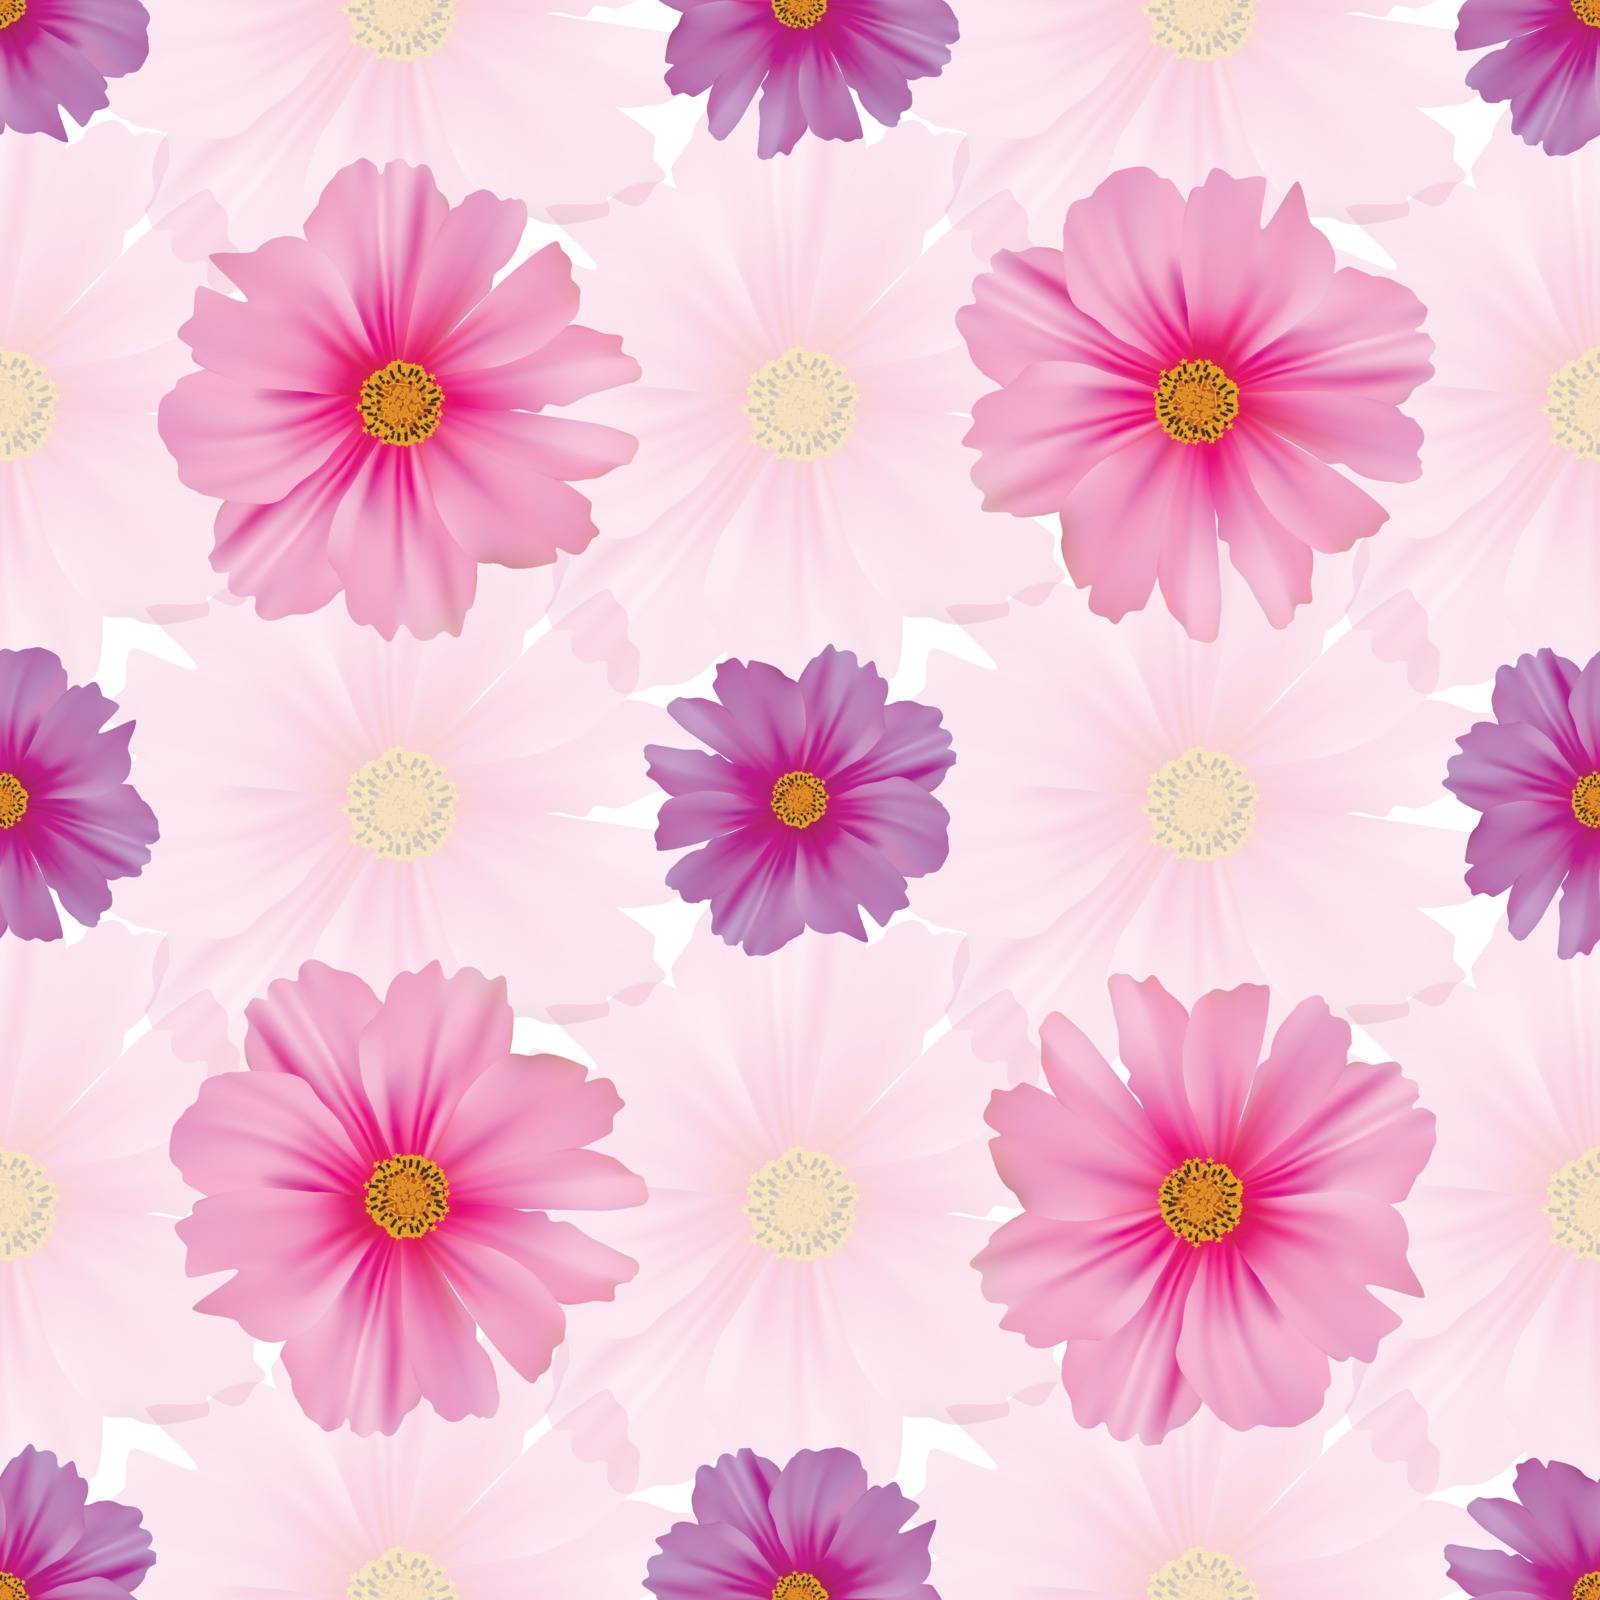 Seamless pattern with cosmos flower. Pink and purple cosmea